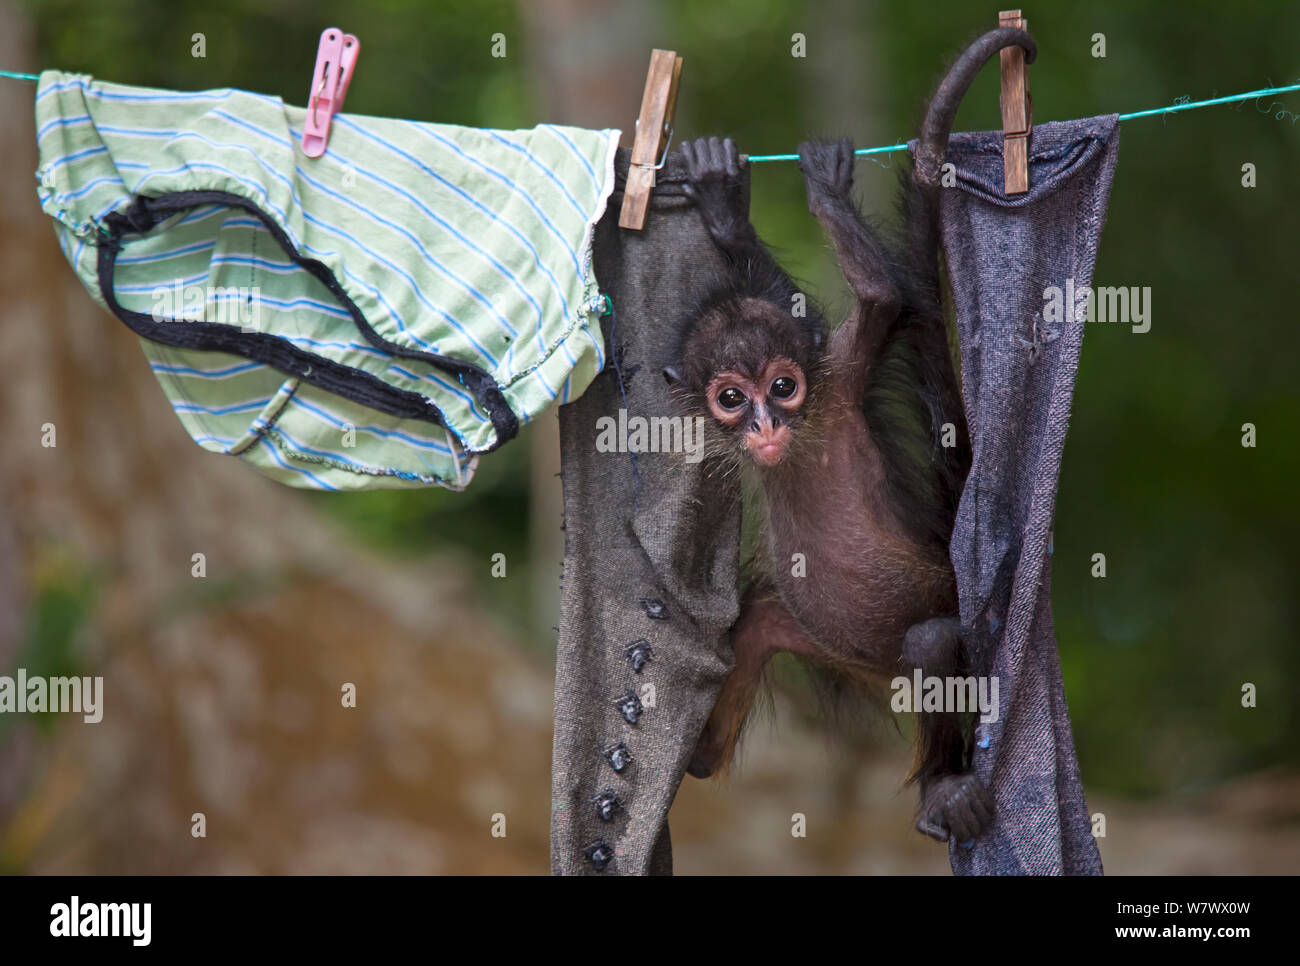 Central American spider monkey (Ateles geoffroyi) orphan hanging on washing line. Baby monkey was kept as pet by workers at El Mirador base camp, after mother was killed. Selva Maya Biosphere Reserve, Peten region, Guatemala. Endangered species. Stock Photo